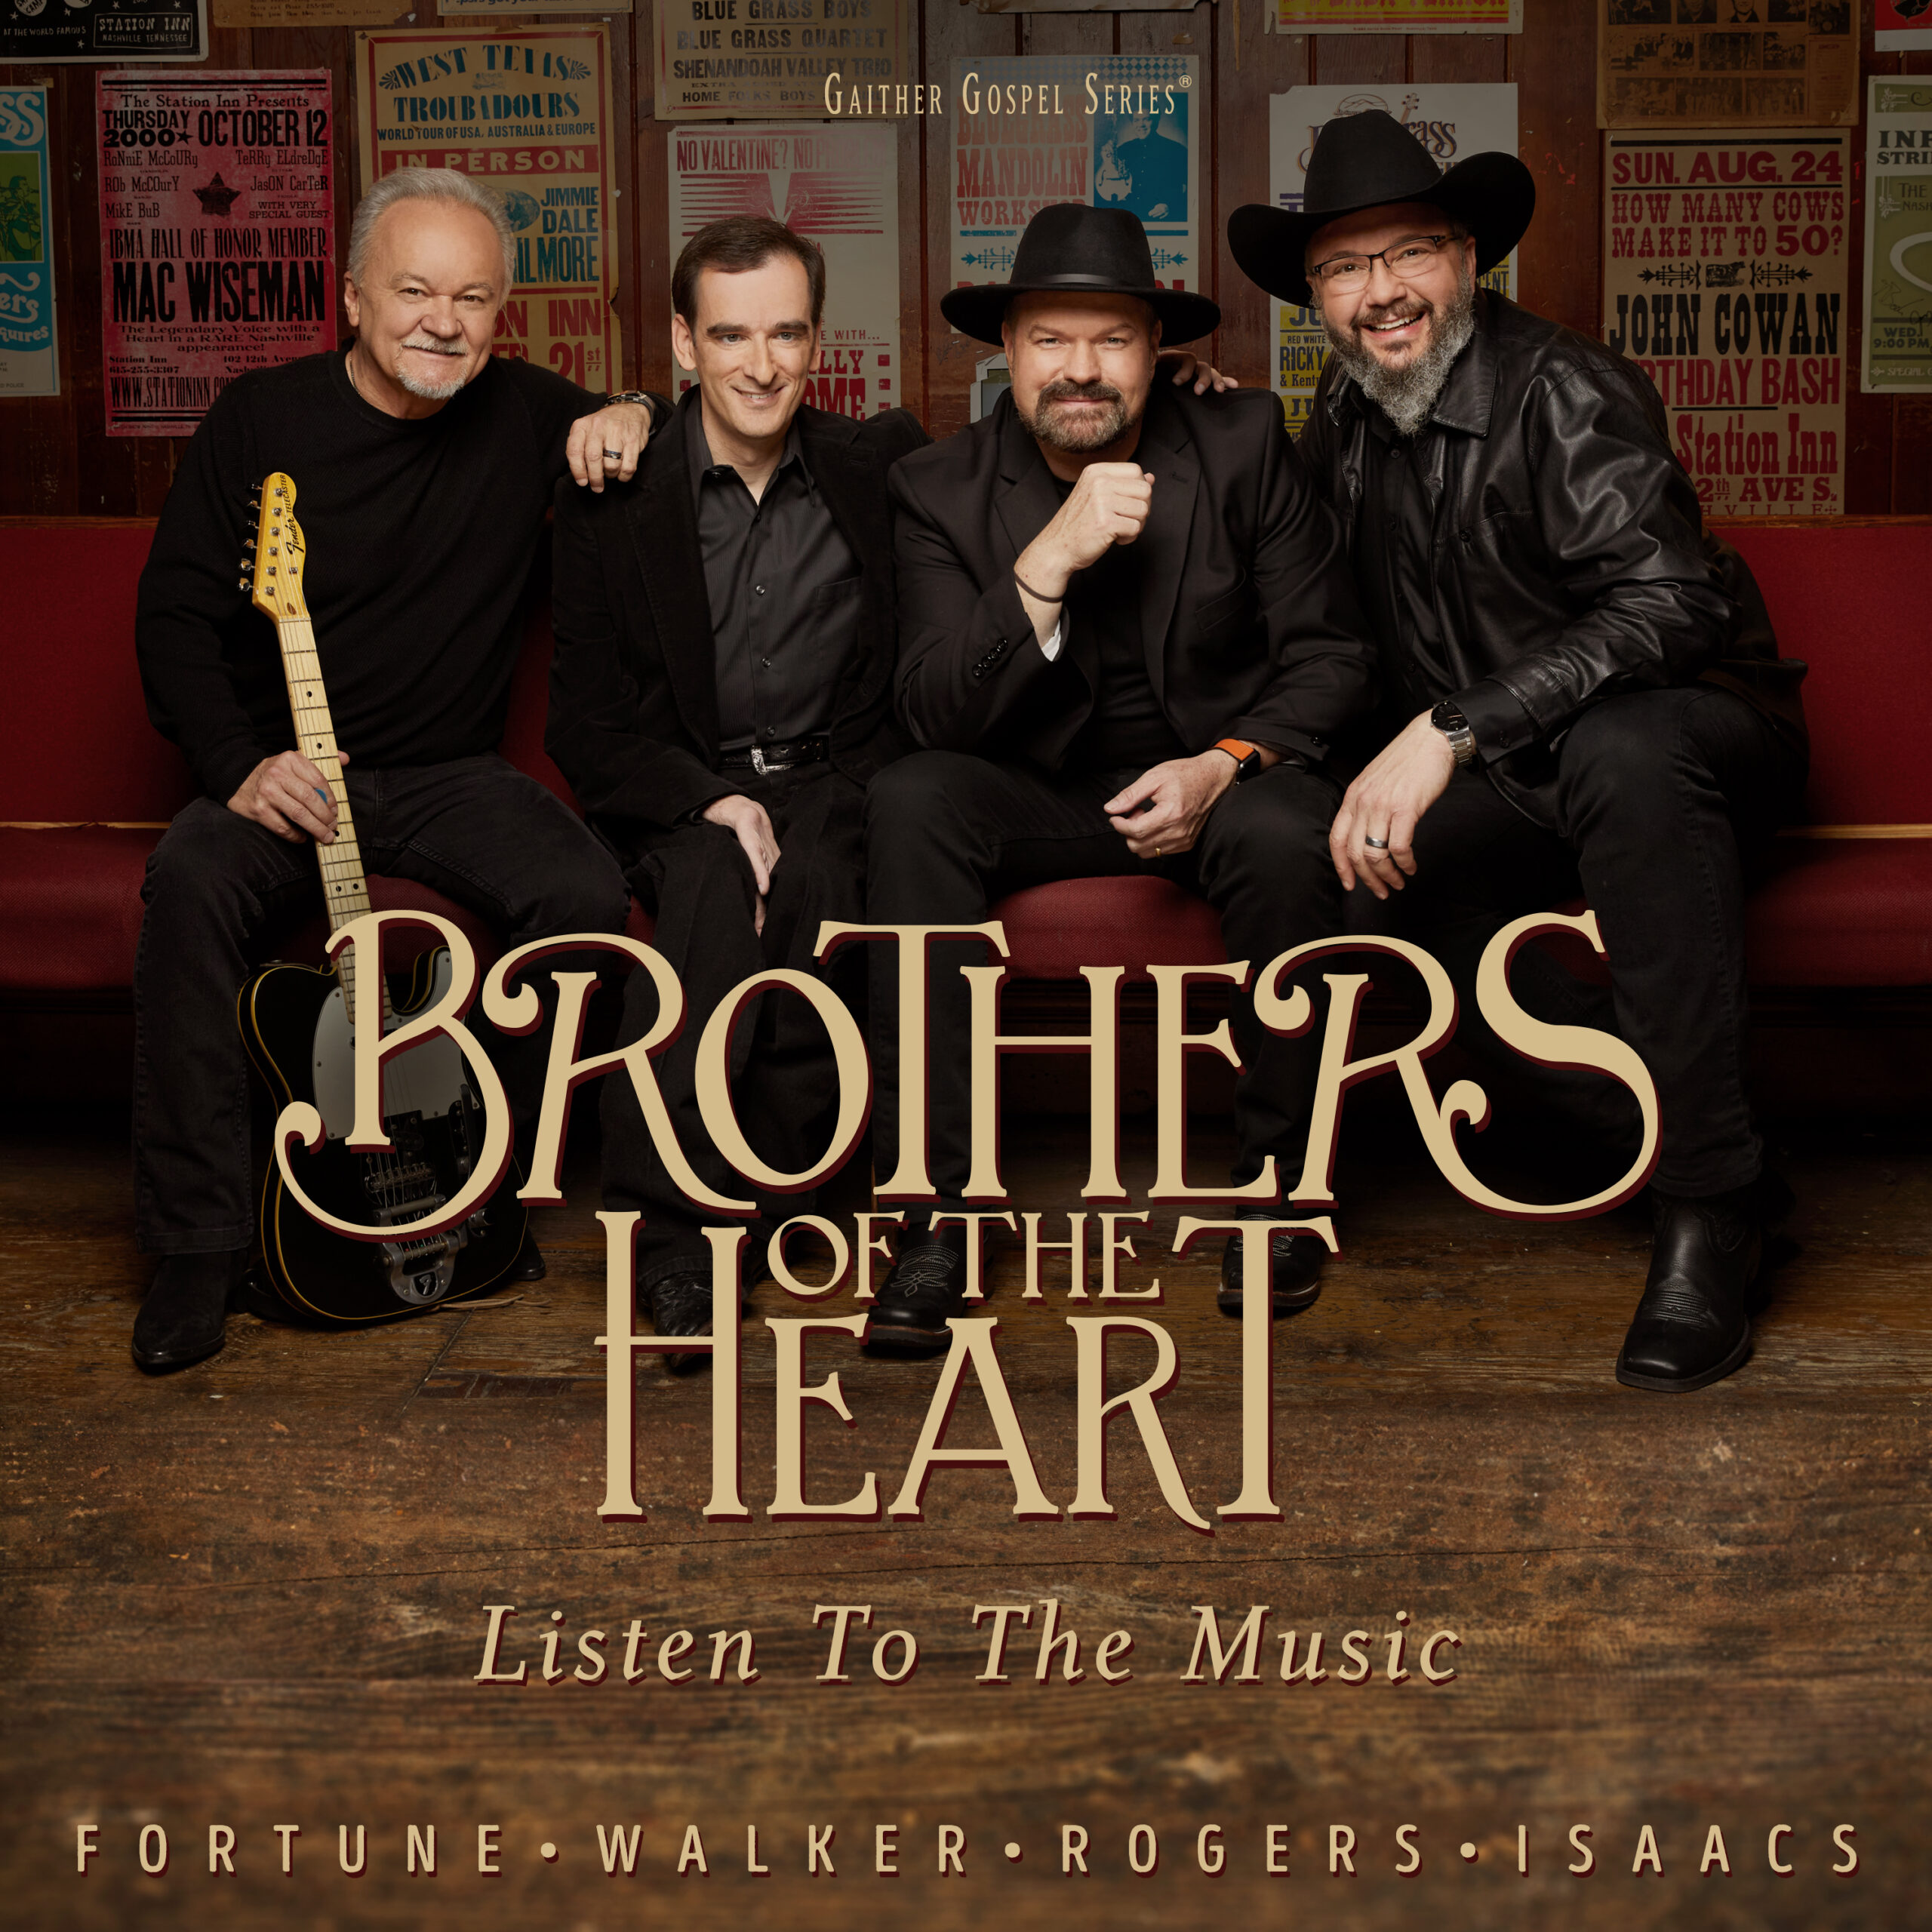 Brothers of the Heart CD/DVD release Jan 20, 2023 Jimmy Fortune